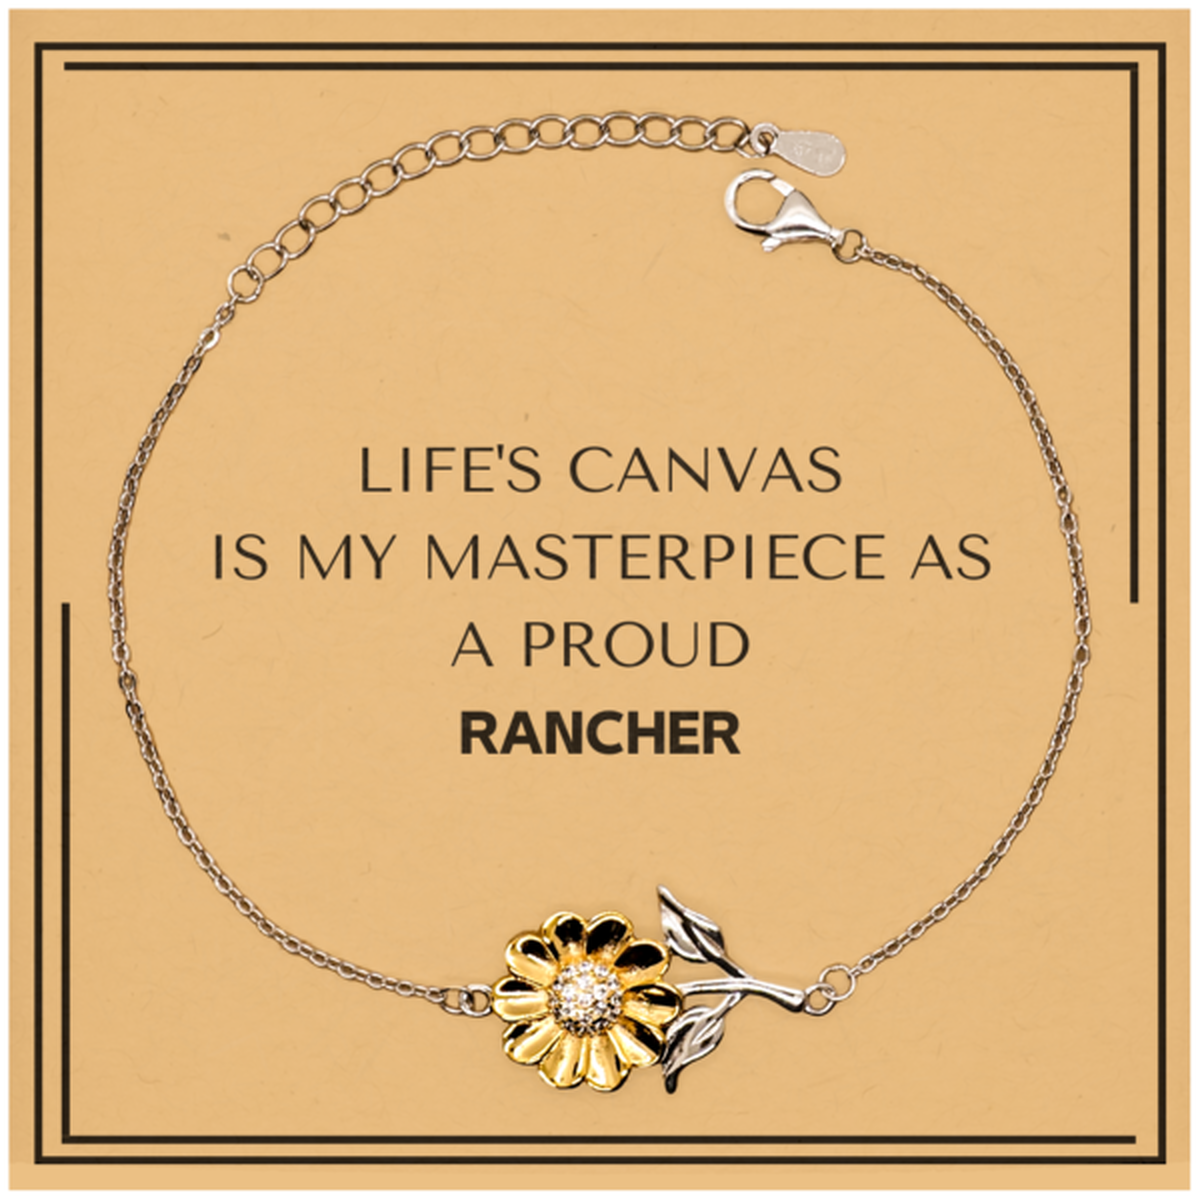 Proud Rancher Gifts, Life's canvas is my masterpiece, Epic Birthday Christmas Unique Sunflower Bracelet For Rancher, Coworkers, Men, Women, Friends